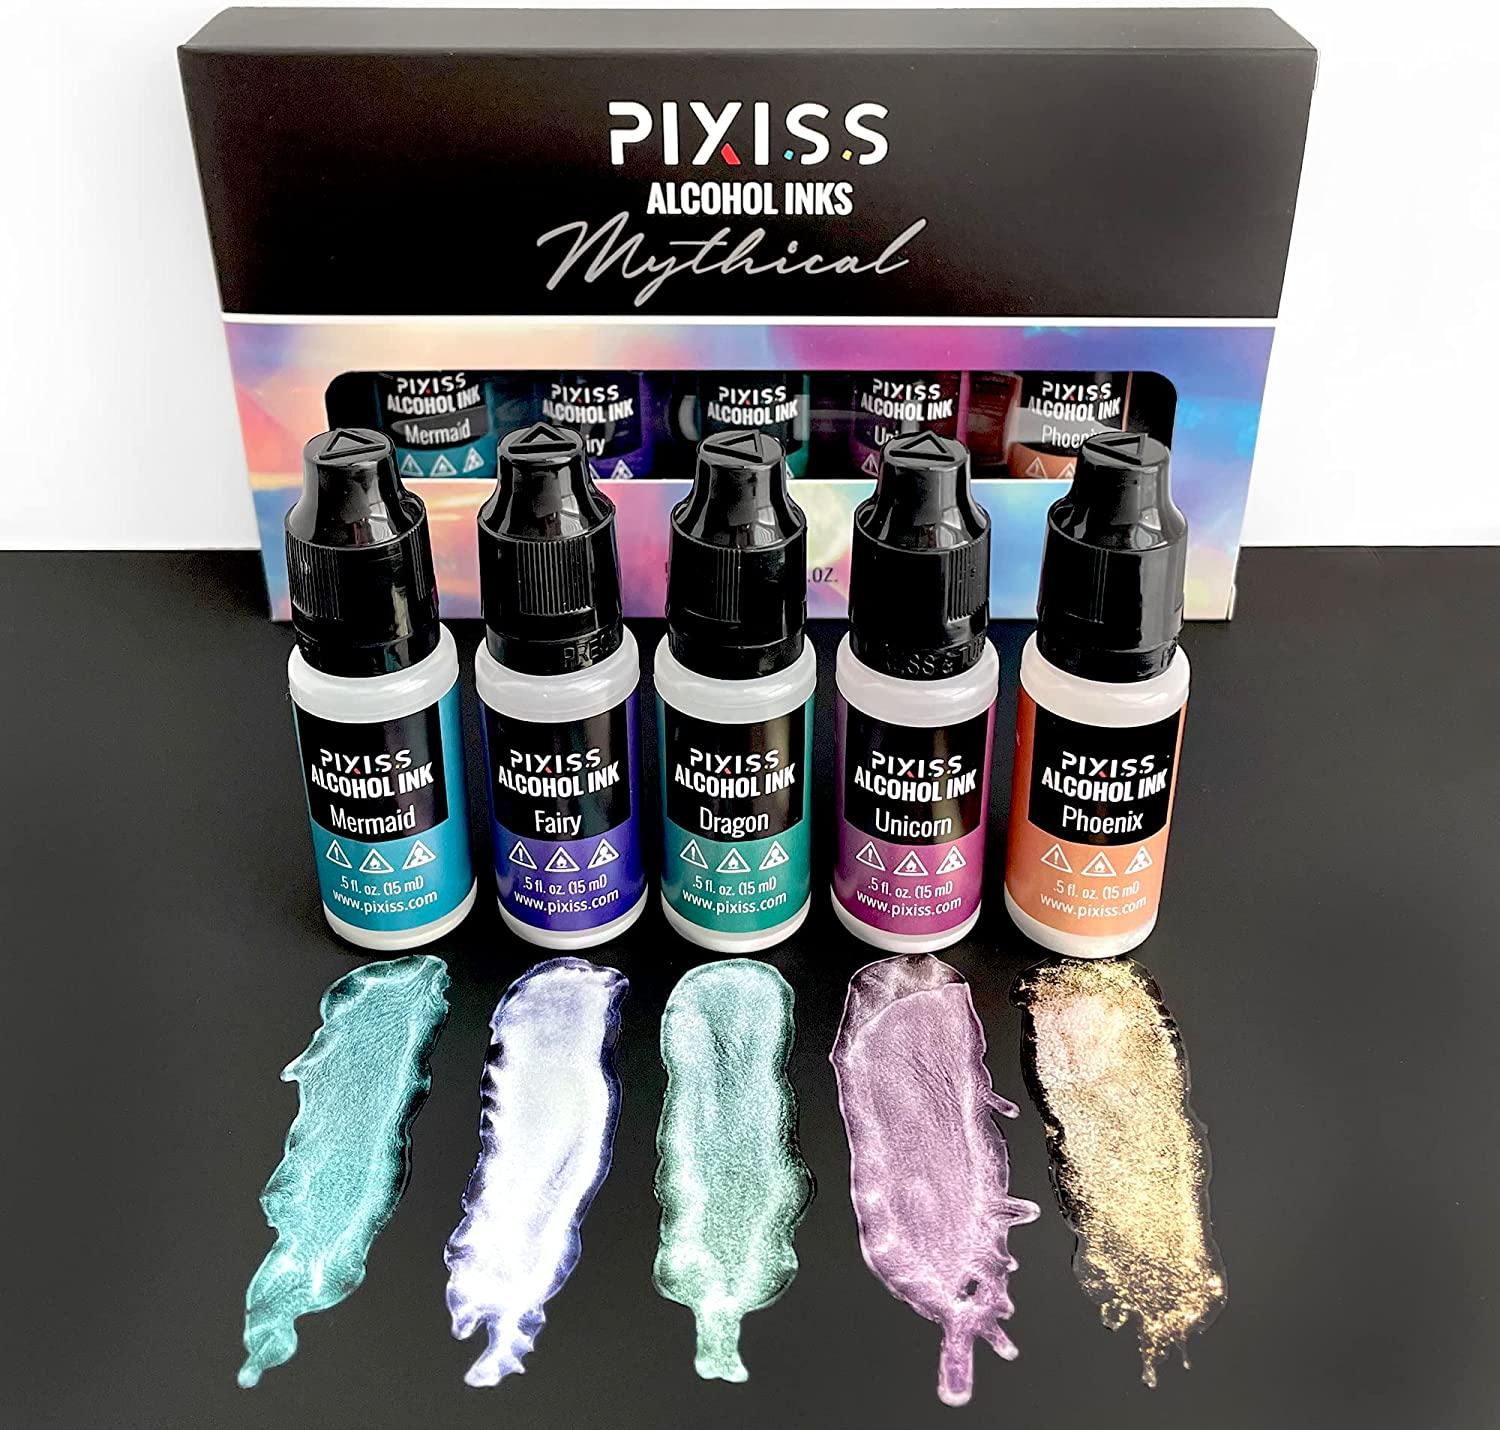 Pixiss Metallic Alcohol Ink Set, Gold Alcohol Ink, Silver, Gunmetal, Copper, Pearl, Alcohol Ink Metallic Mixatives with Extreme Shimmer for Alcohol